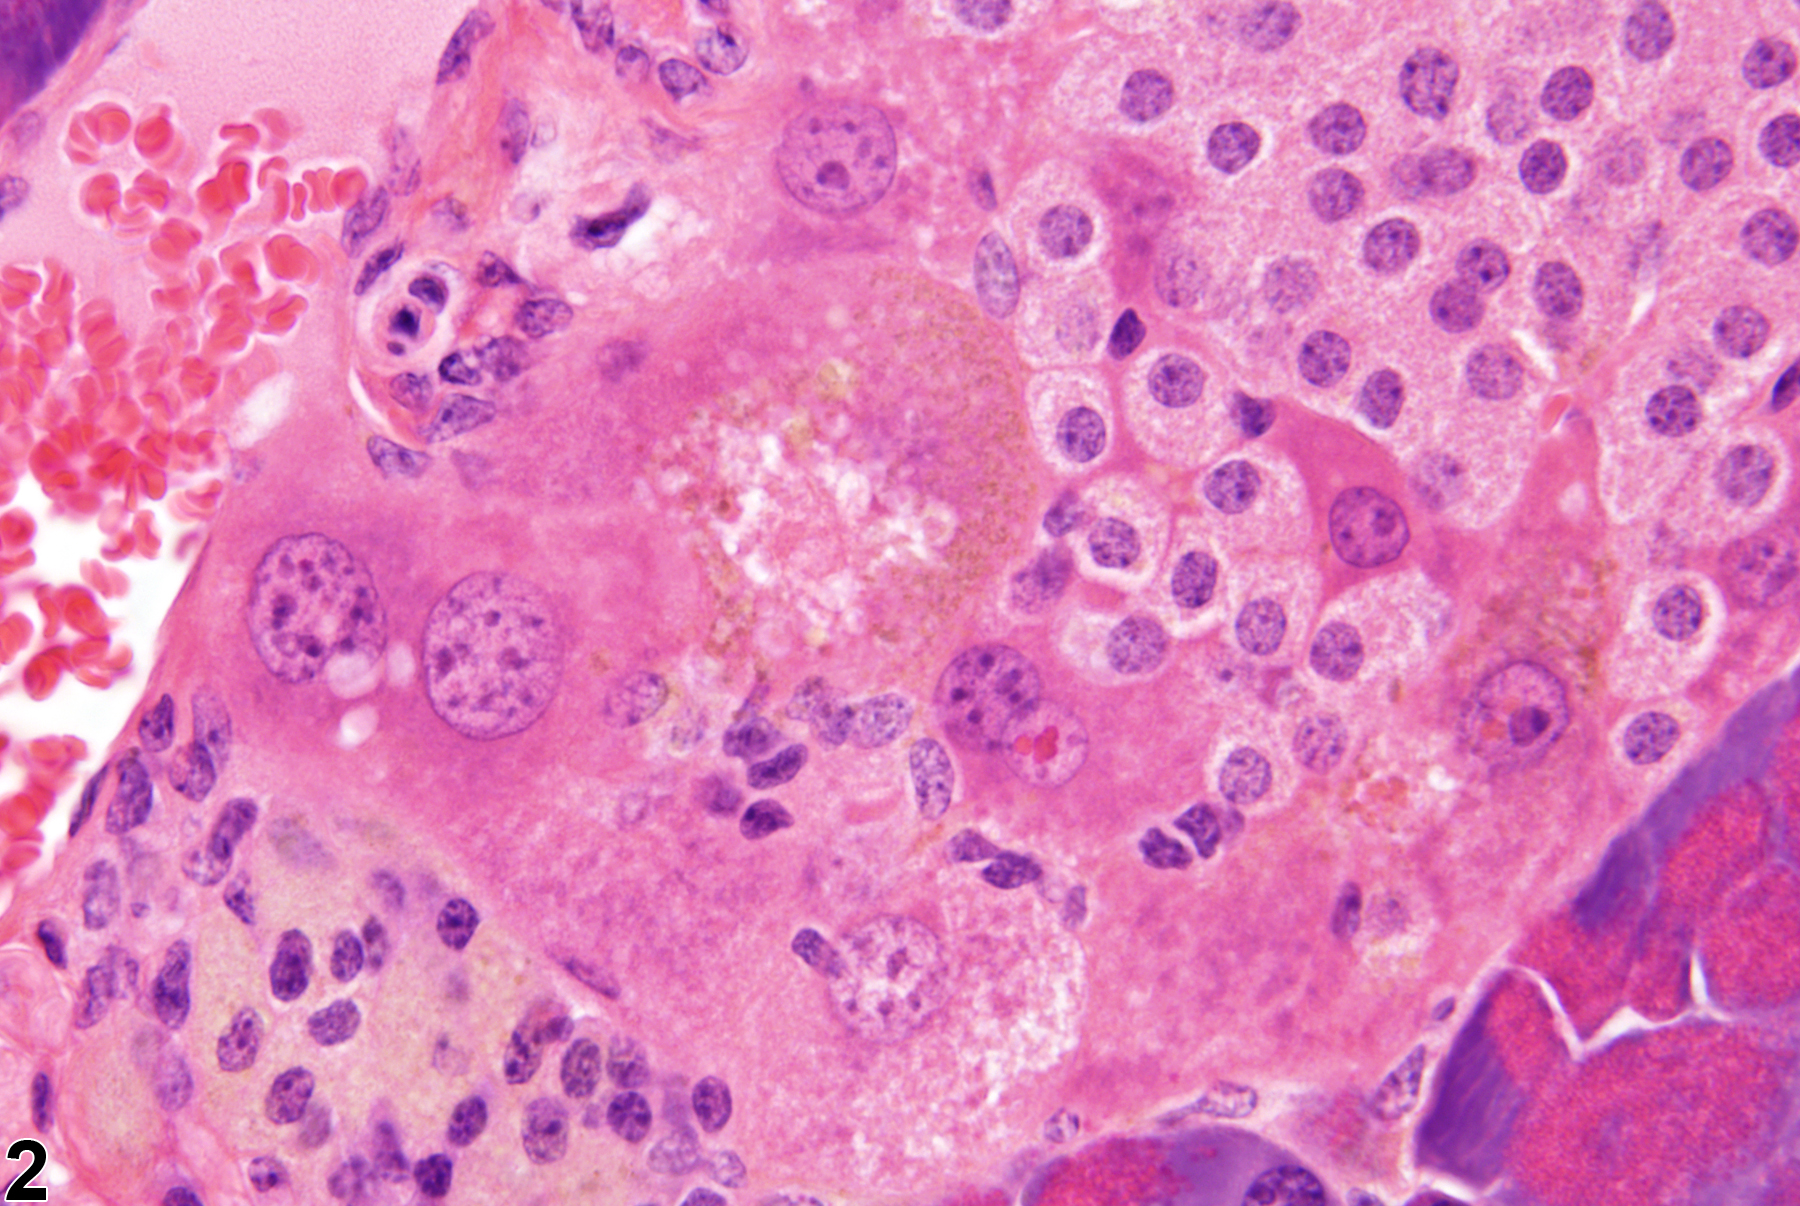 Image of metaplasia, hepatocyte in the pancreatic islet from a male B6C3F1 mouse in a chronic study